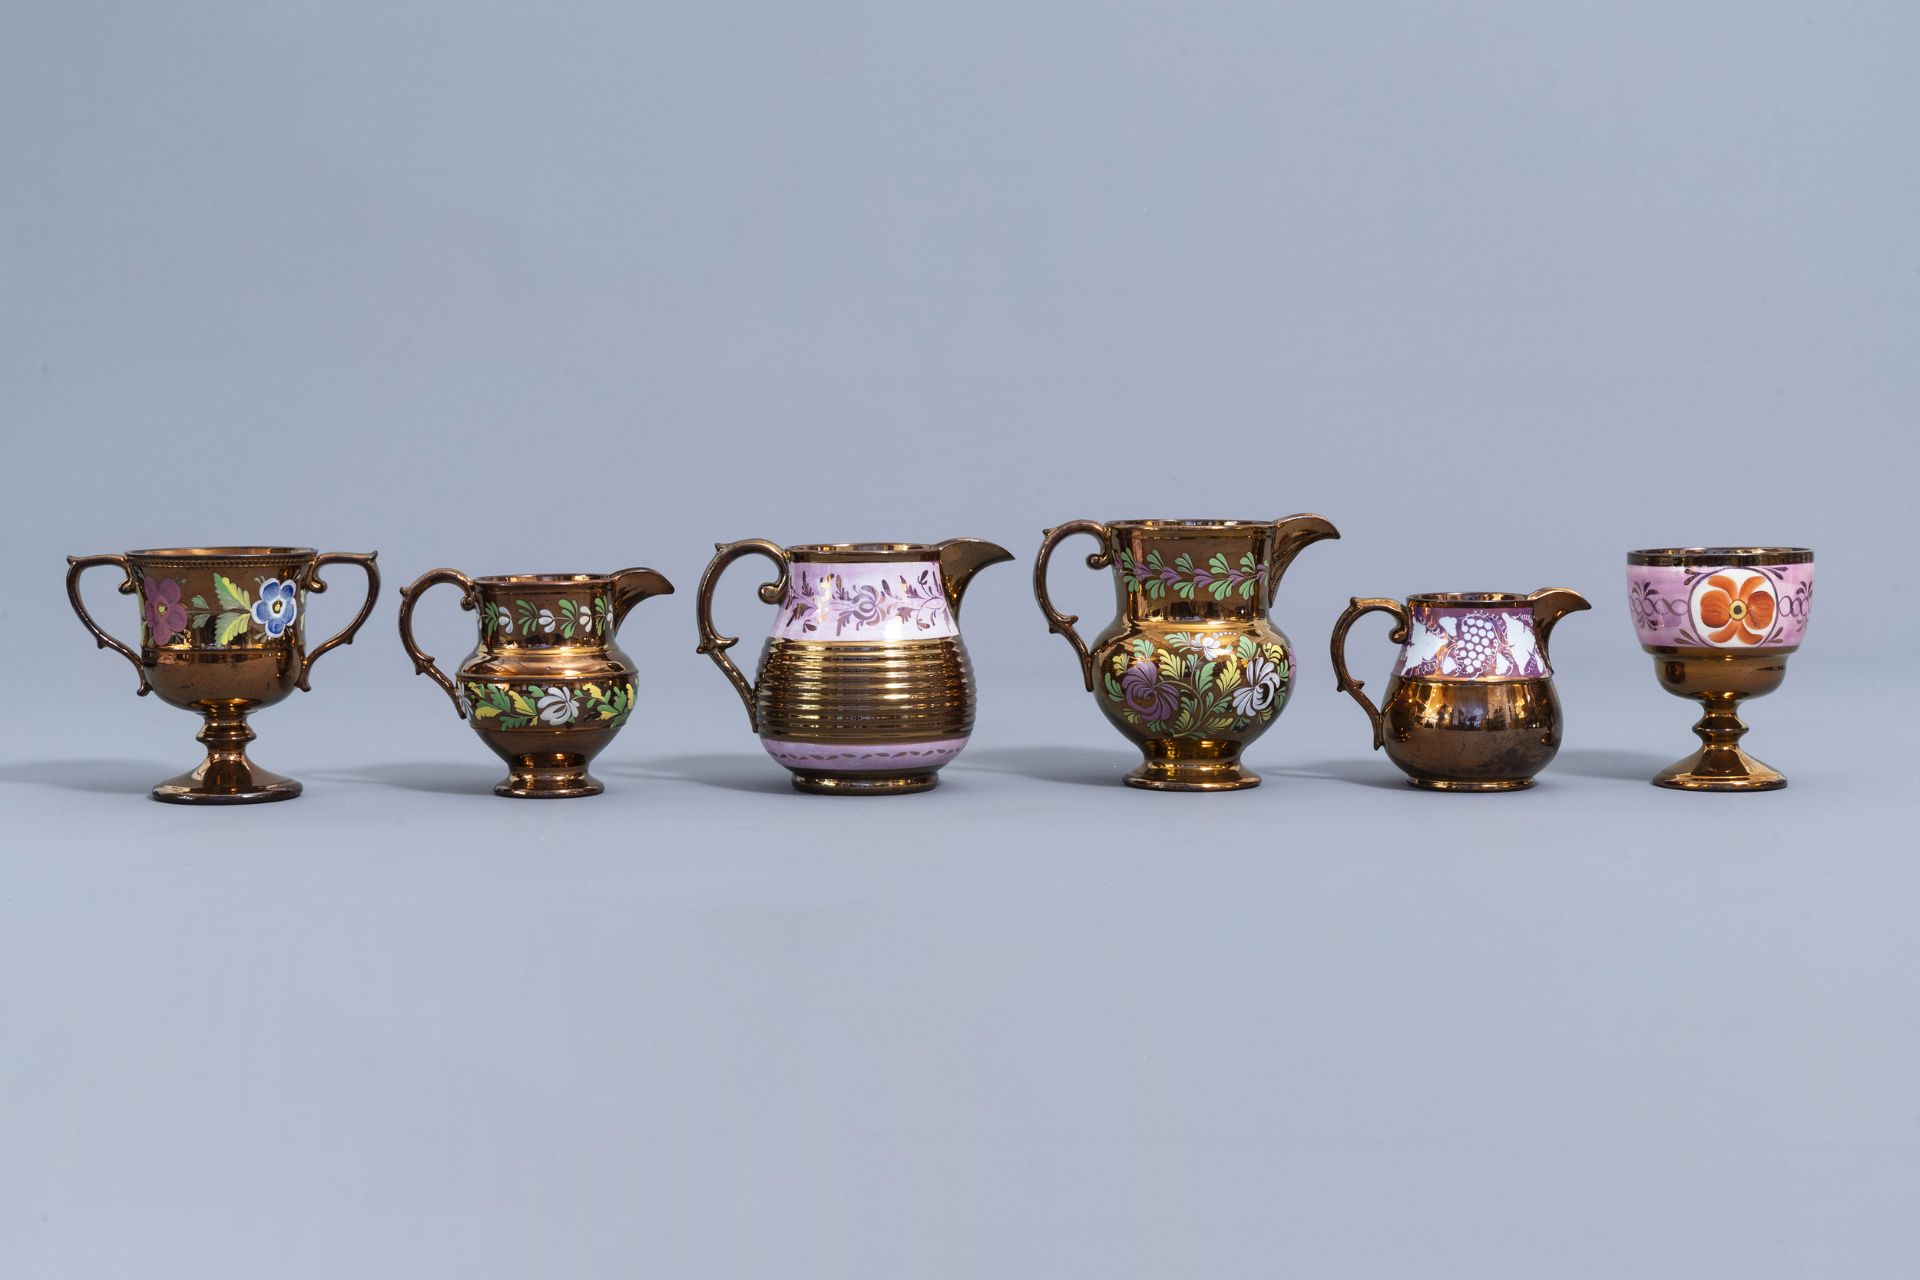 A varied collection of English lustreware items with polychrome floral design, 19th C. - Image 32 of 64